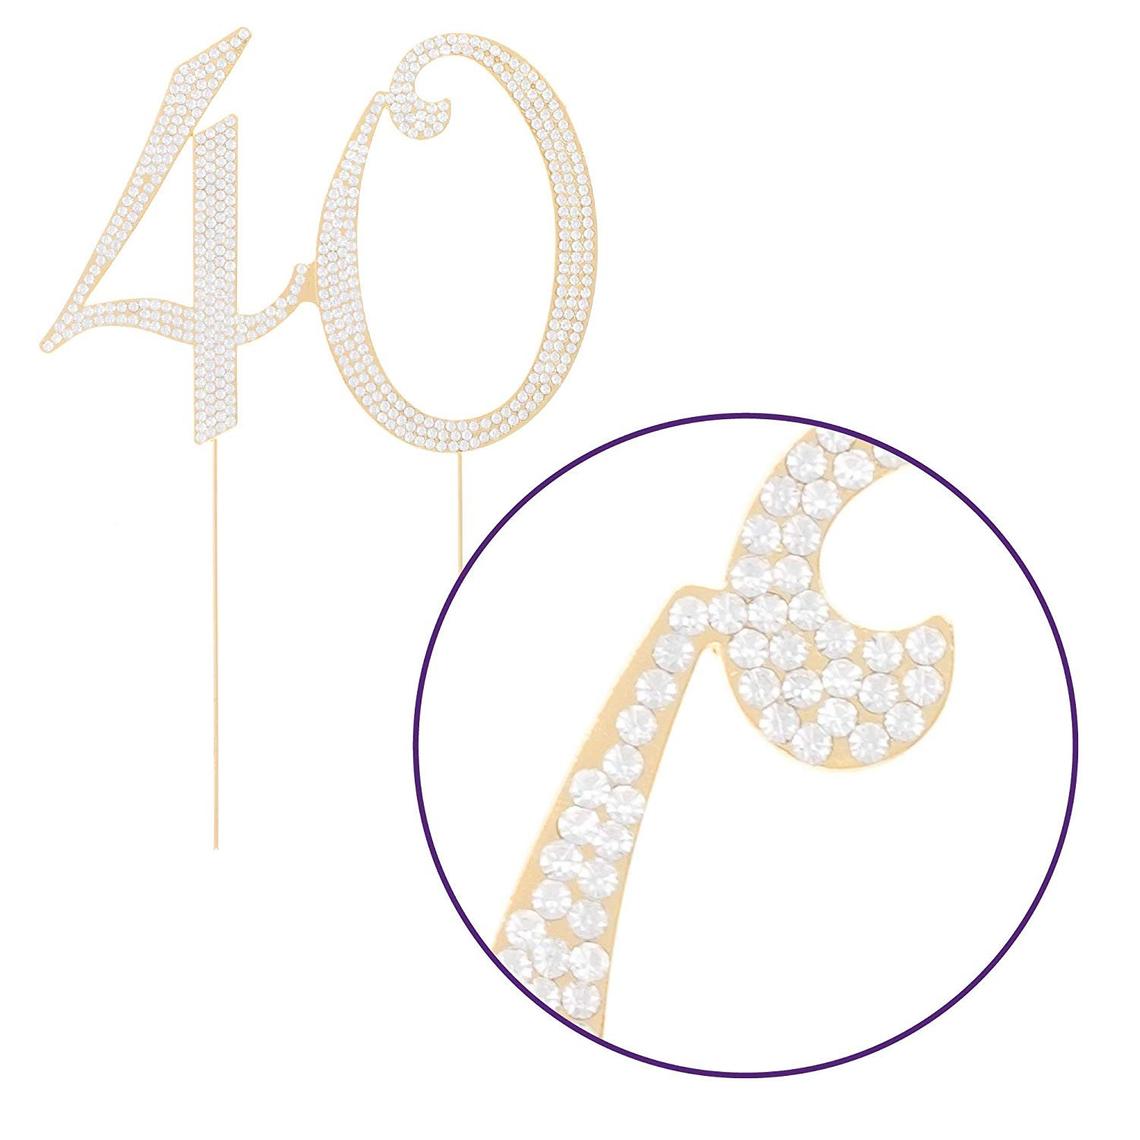 40 Cake Topper for 40th Birthday or Anniversary, Gold Crystal Rhinestone Metal Number, Party Supplies and Decoration Ideas, Centerpiece